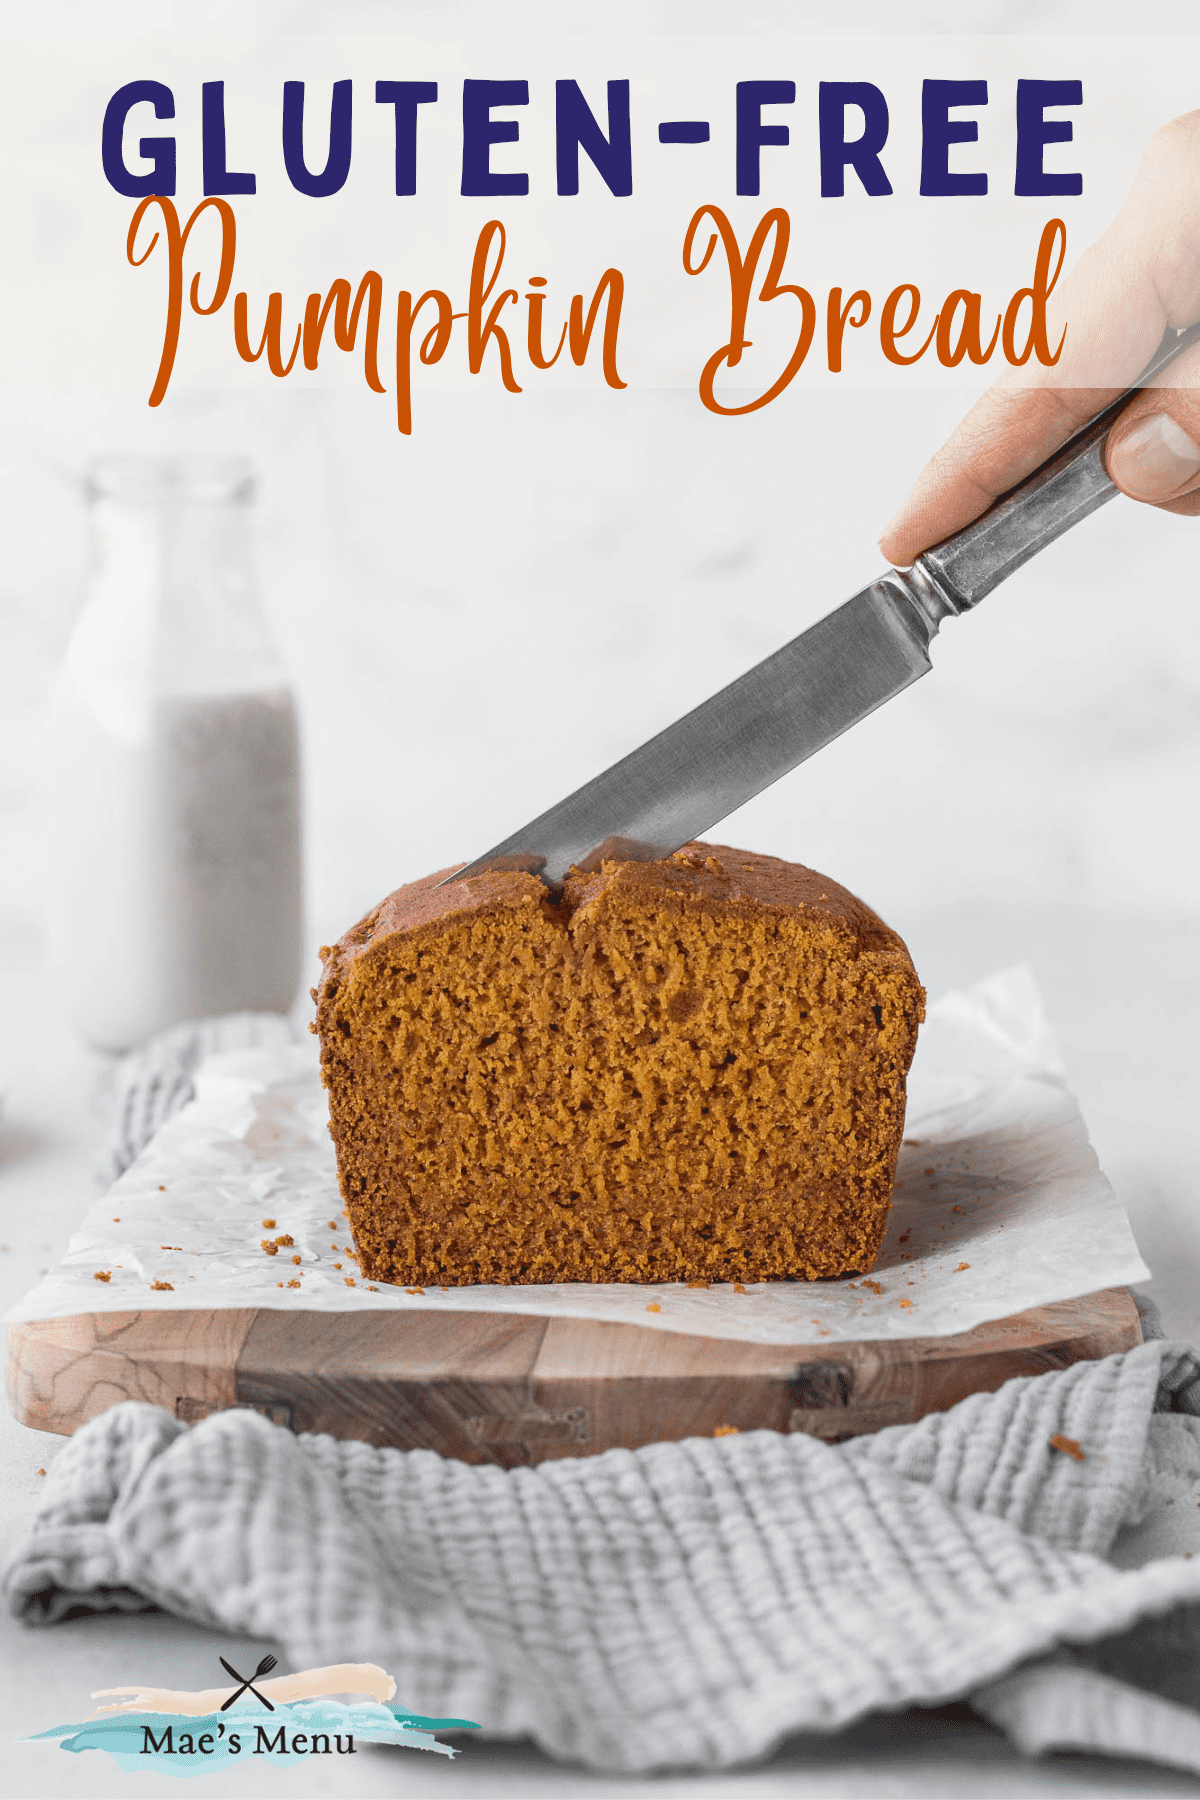 Pinterest pin with hand holding a silver knife and cutting into a fresh loaf of pumpkin bread.